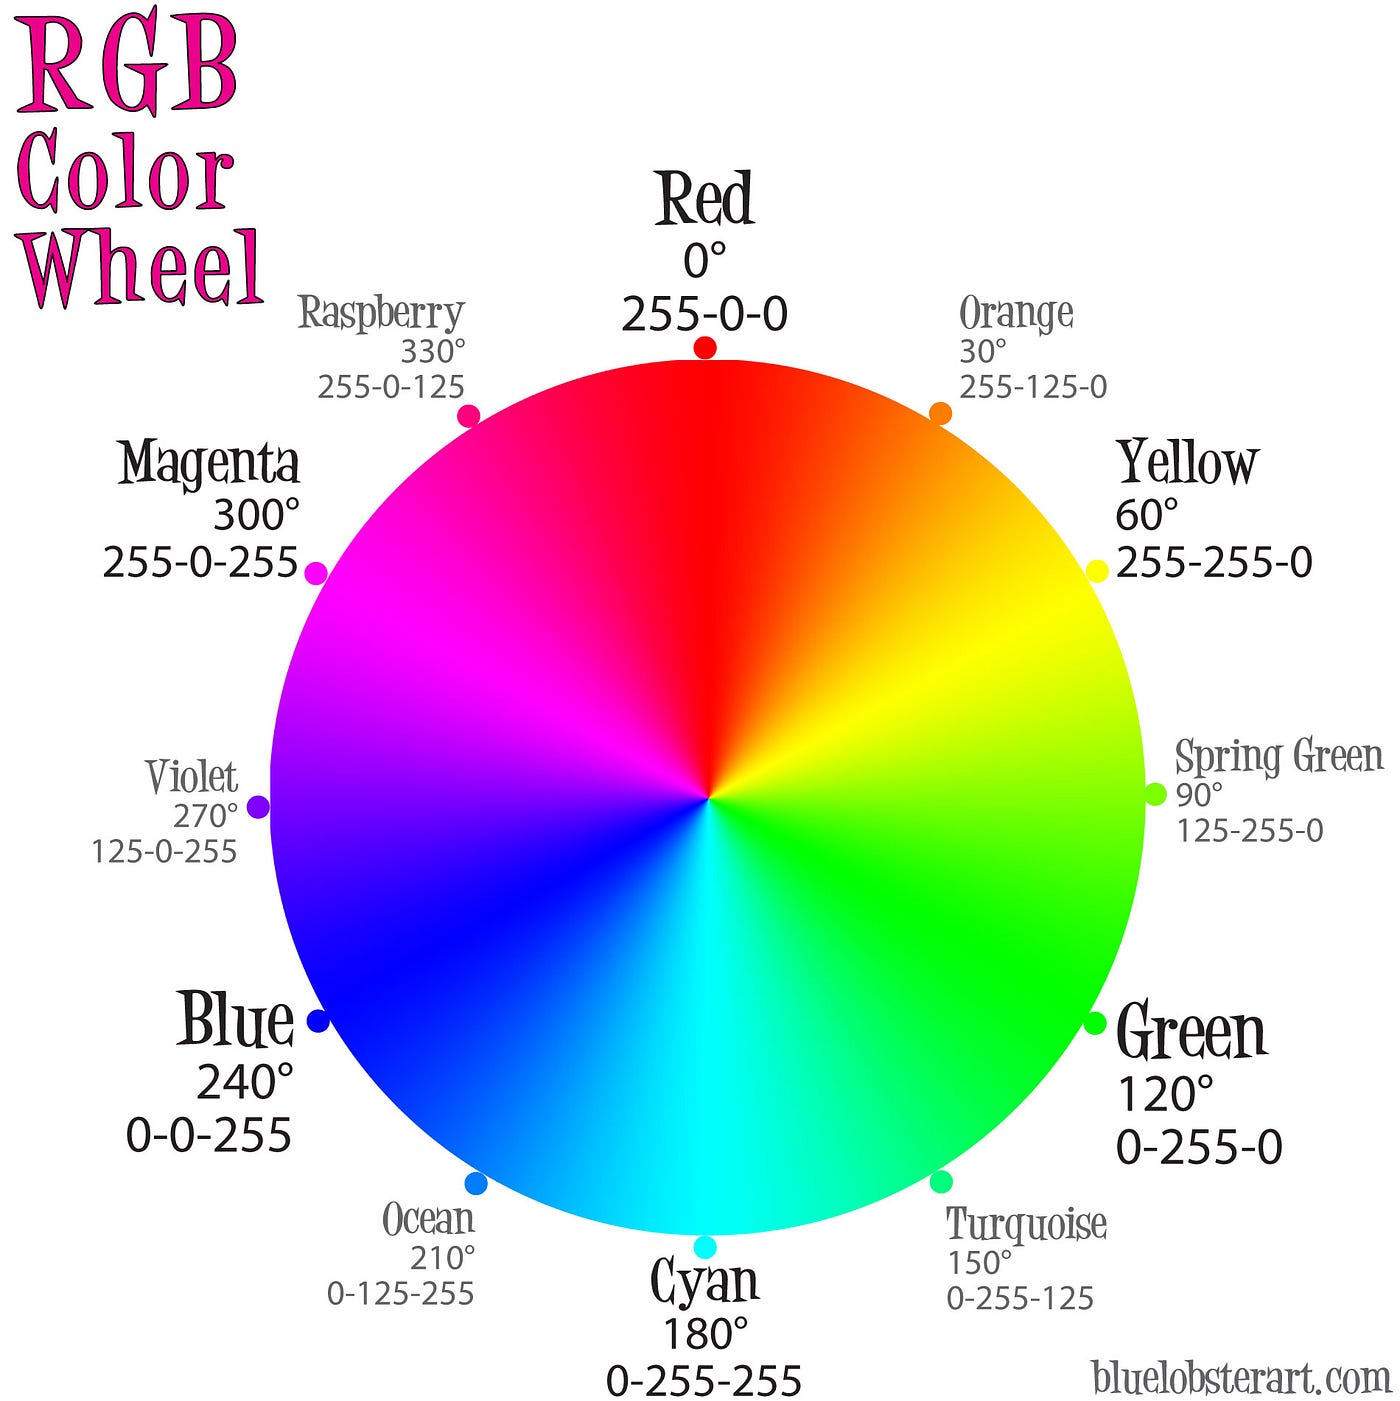 What color is RGB?